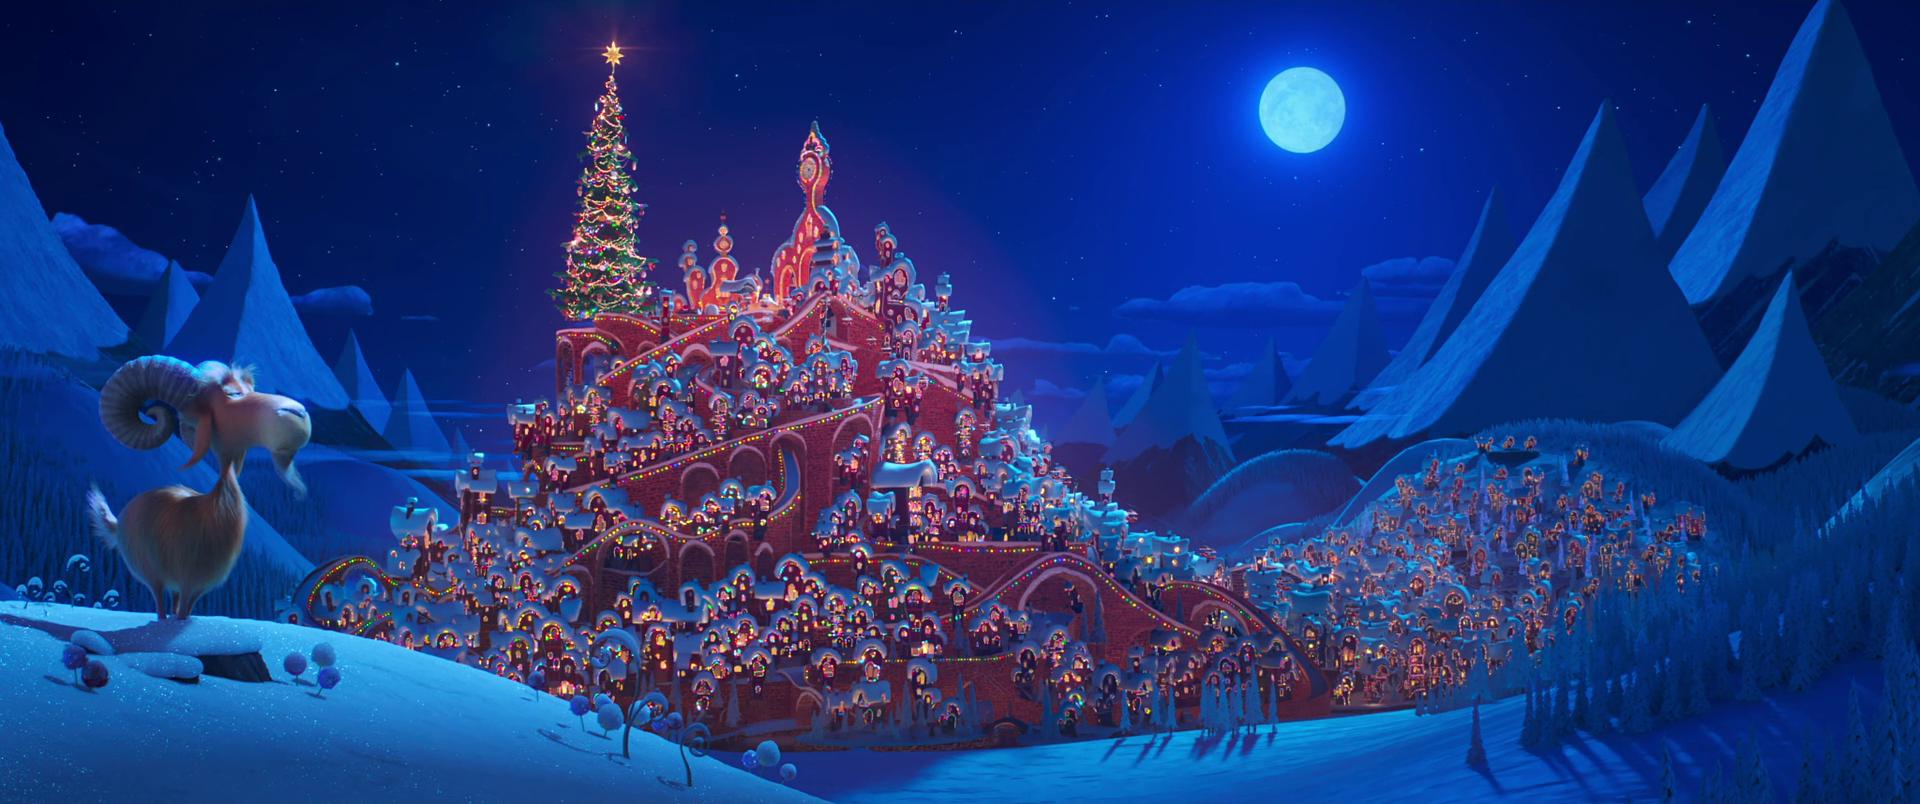 The Grinch Whoville Background